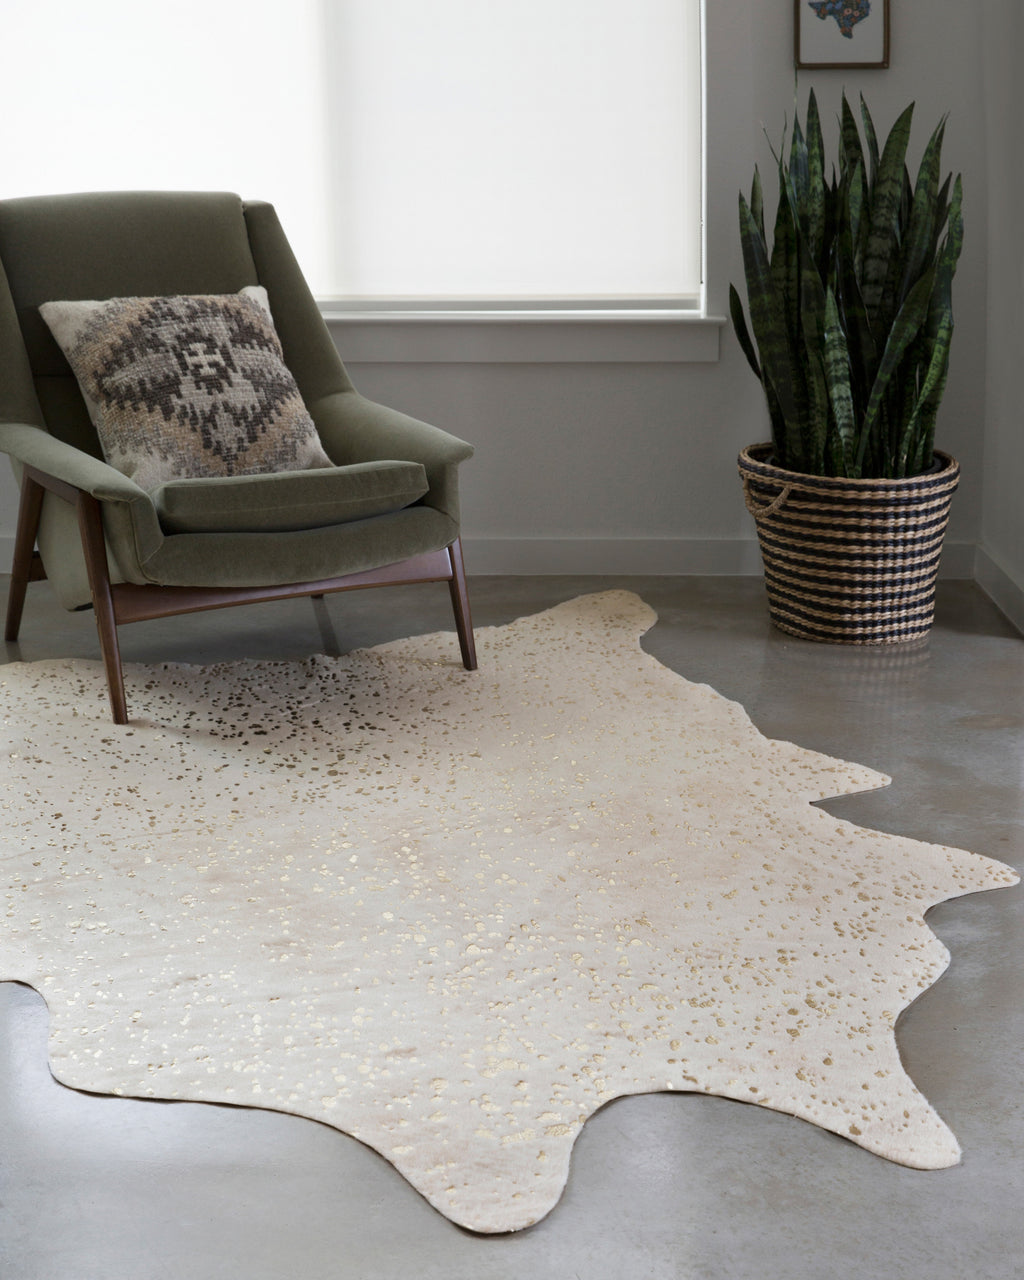 Loloi II Bryce BZ-08 Ivory/Champagne Area Rug Room Image Feature